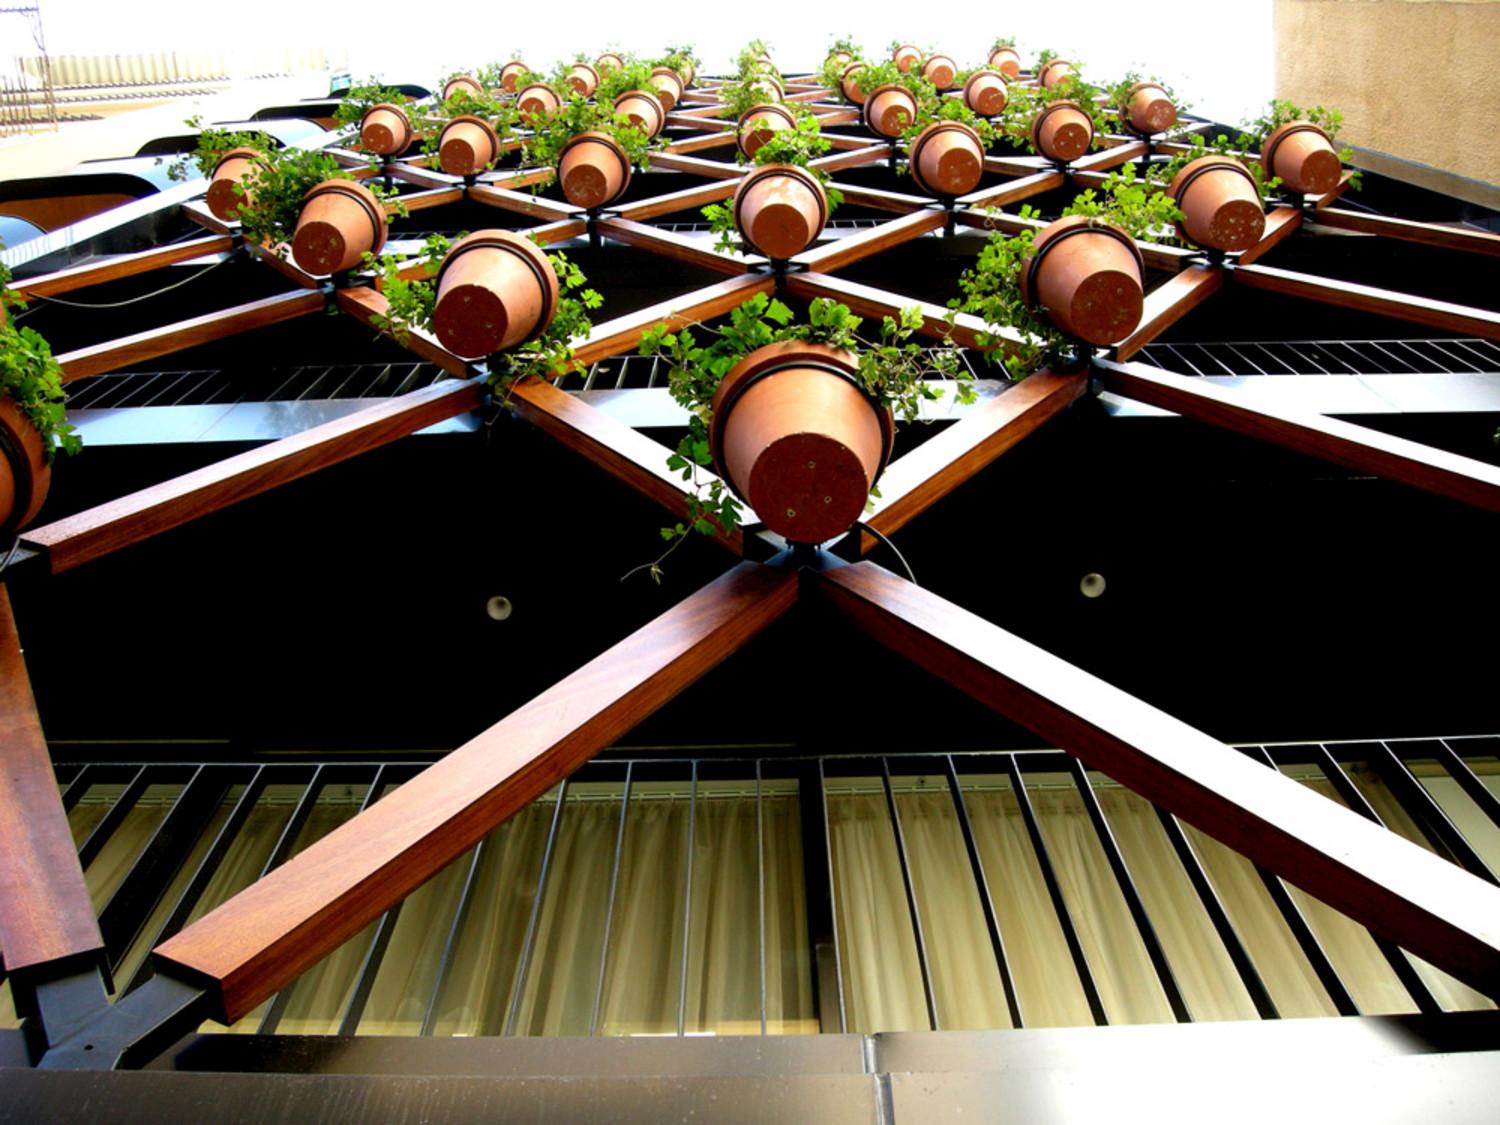 Looking up at the structure of interlocking wooden elements with suspended clay pots